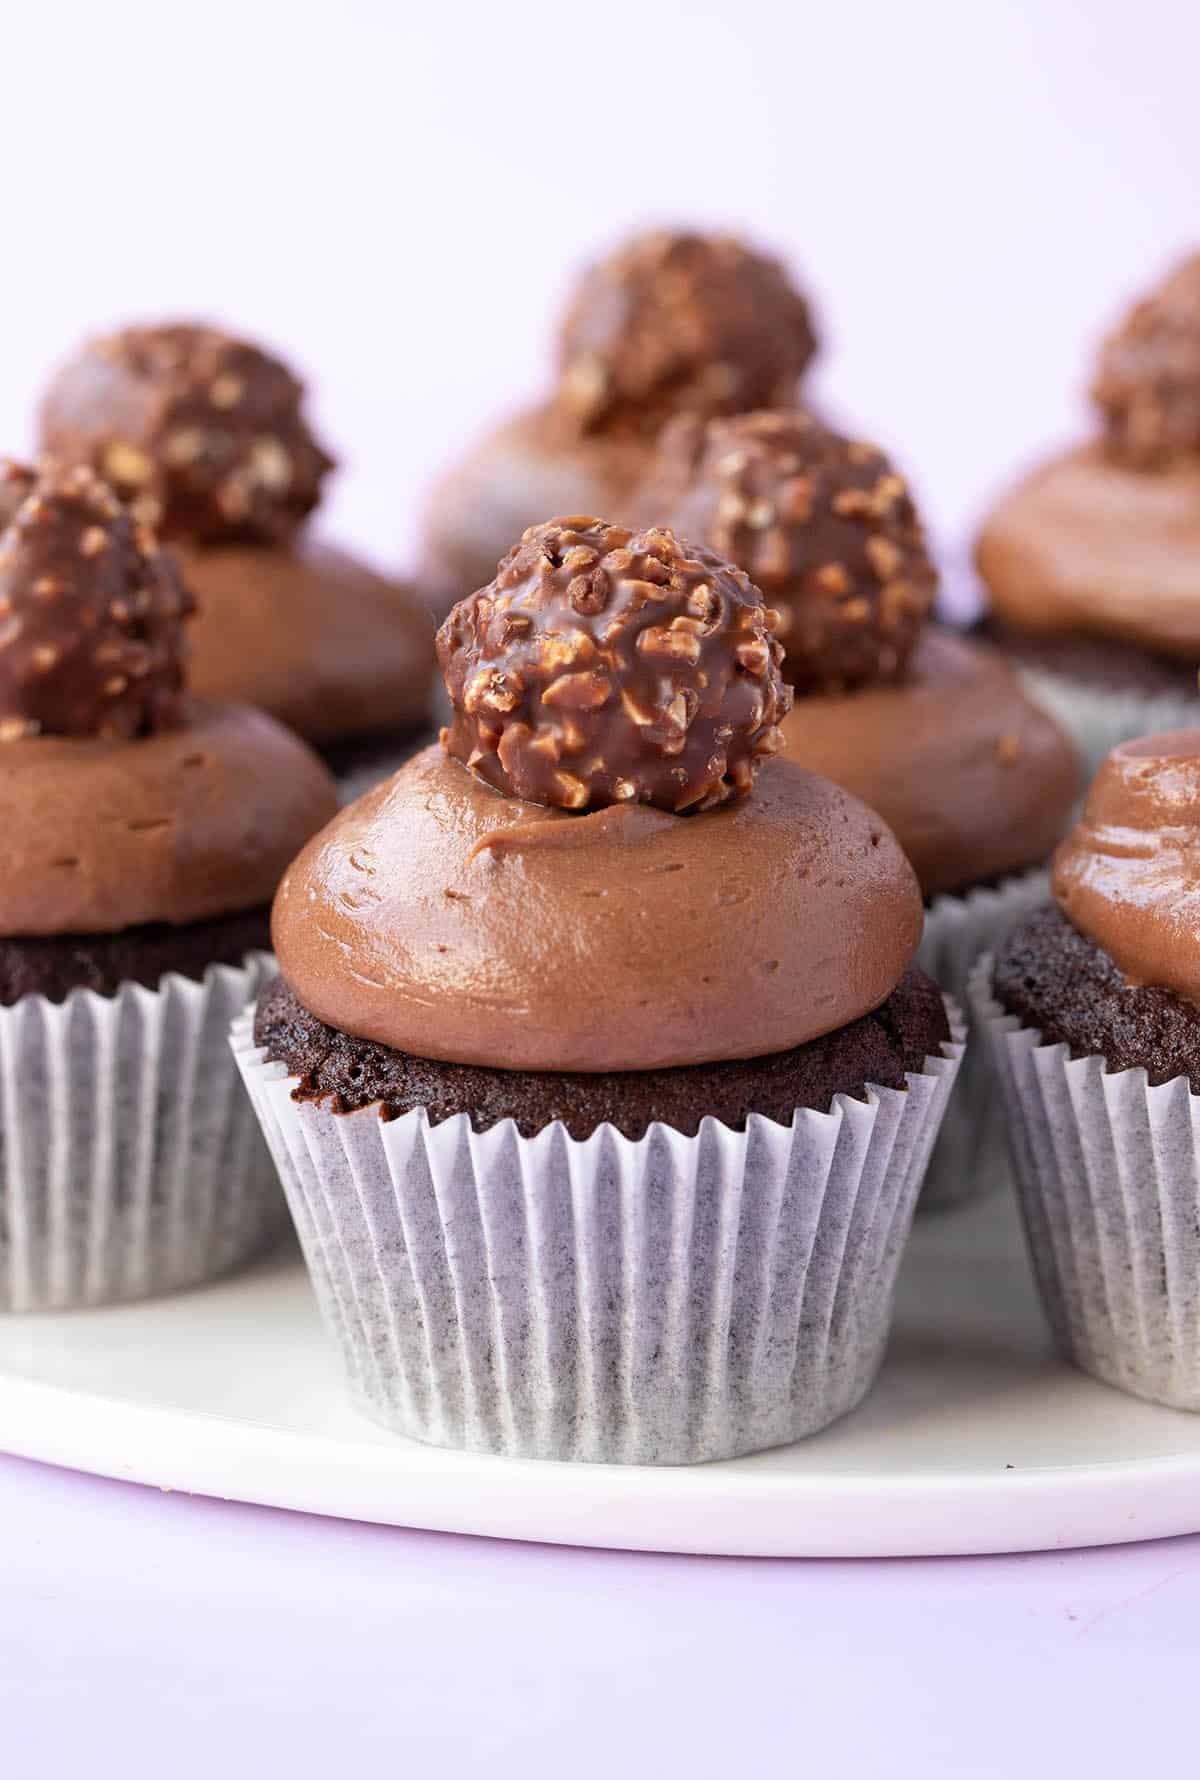 A plate of homemade Nutella Cupcakes decorated with a ferrero rocher.